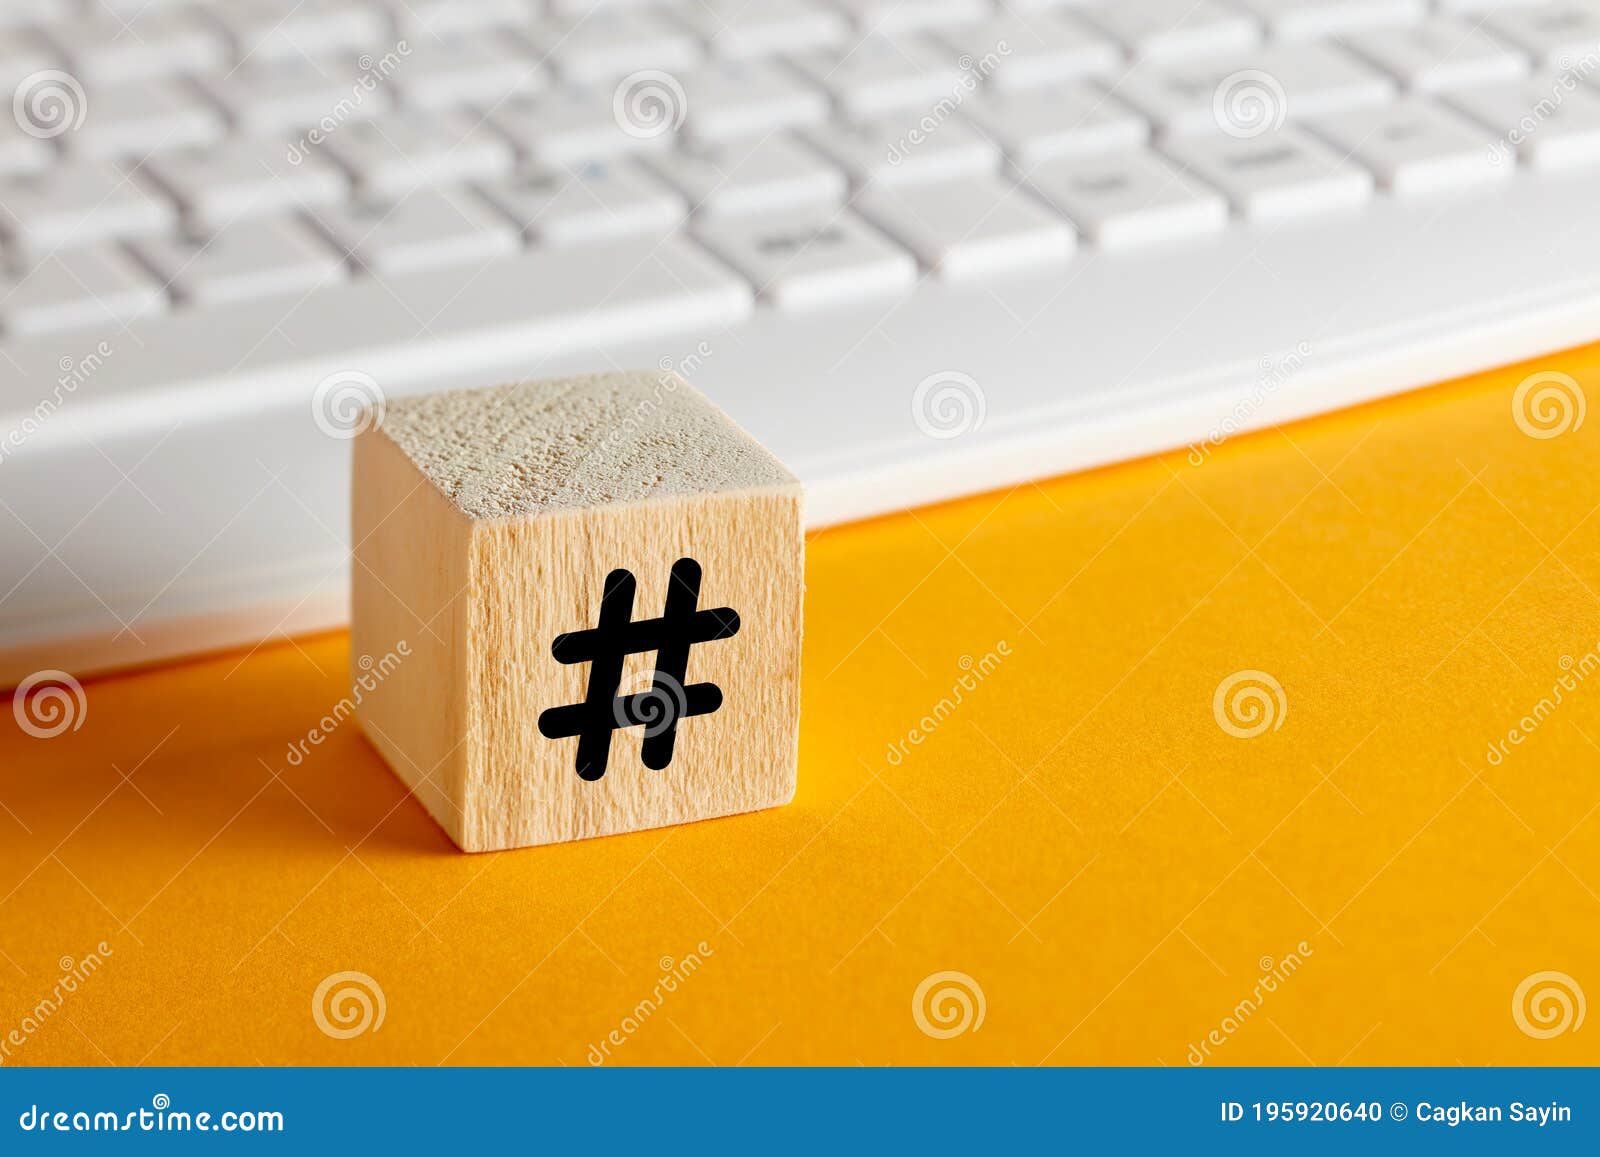 Hashtag Symbol On A Wooden Cube With Computer Keyboard Background On Yellow Stock Photo Image Of Communicate Network